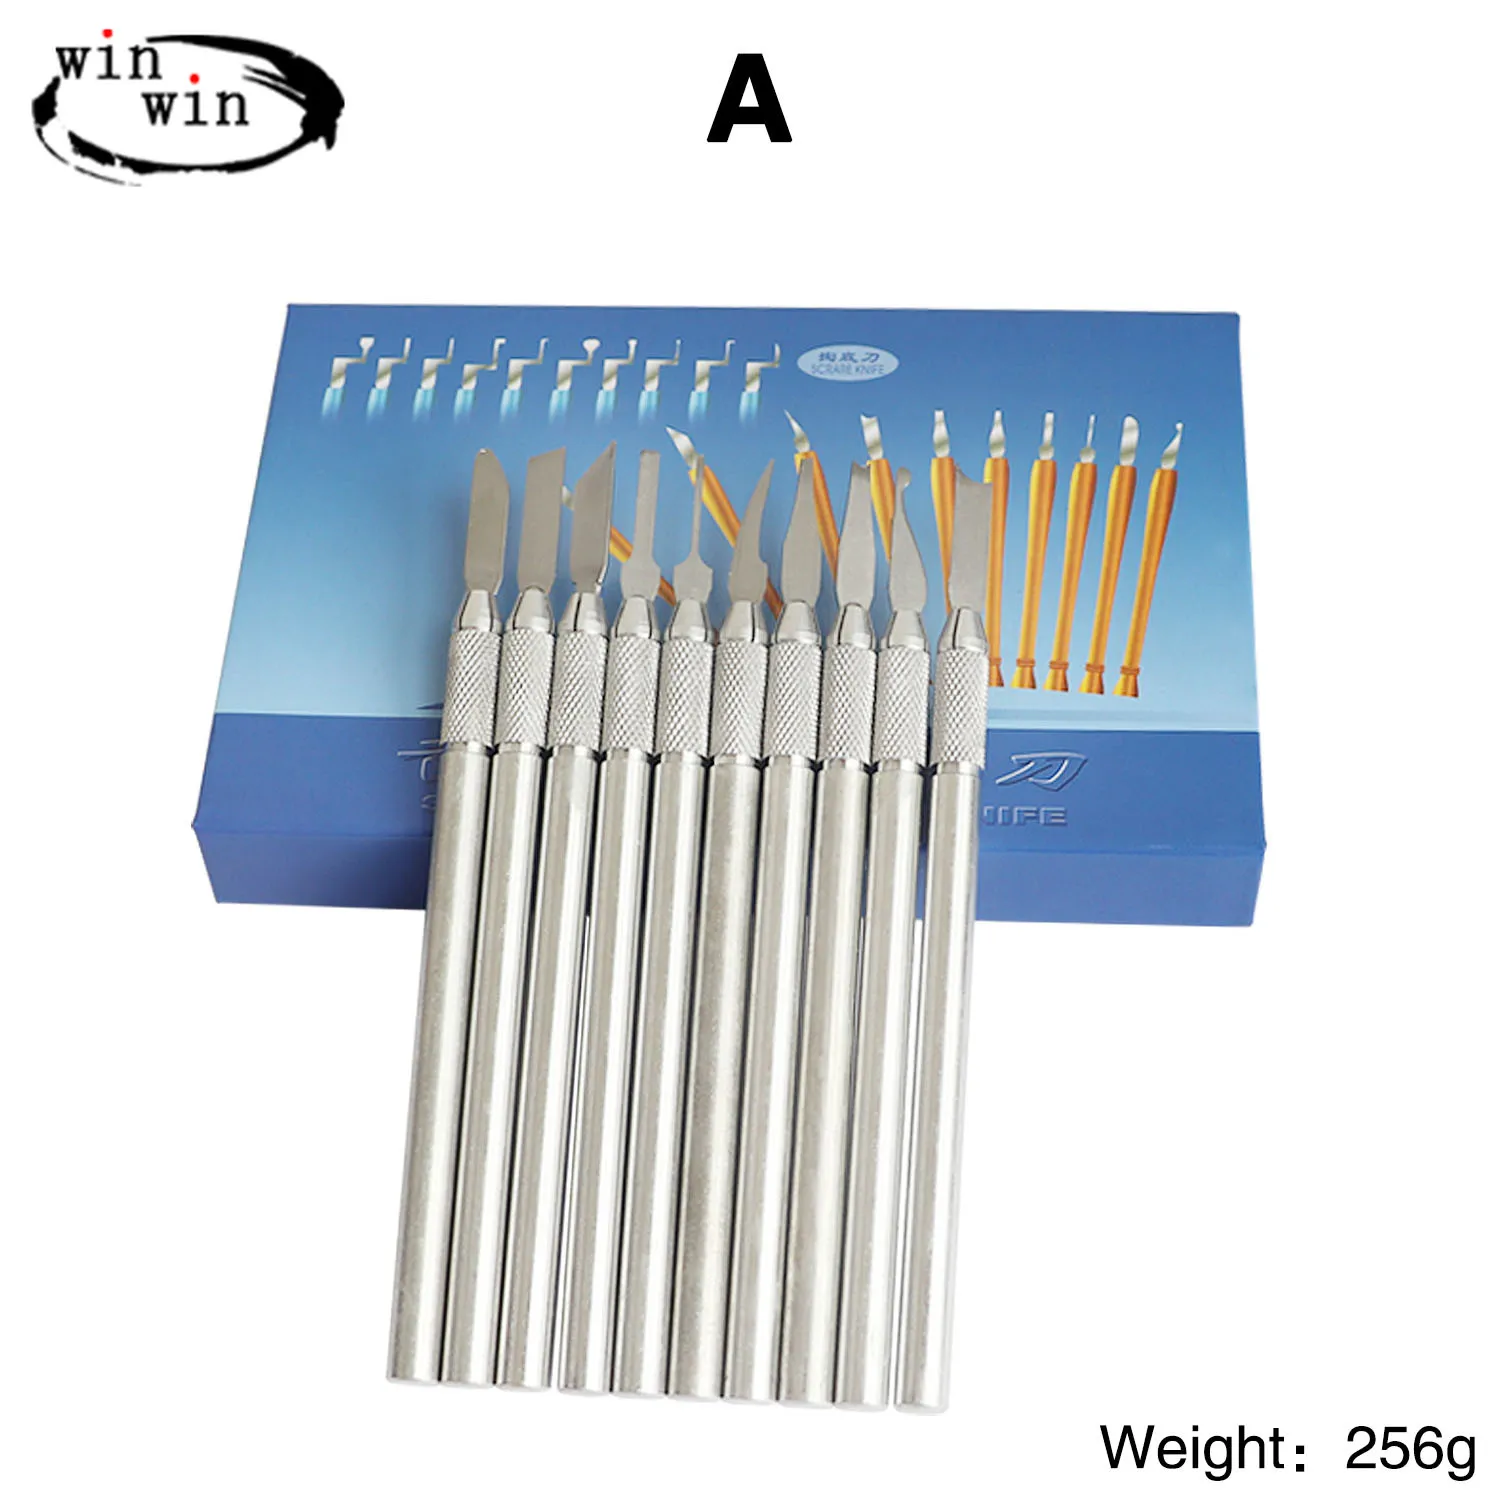 

10 Pcs Stainless Steel Spatula Wax & Clay Sculpting Tool Set Steel Modeling Hand Tool Wax Carvers Carving Knives Pottery